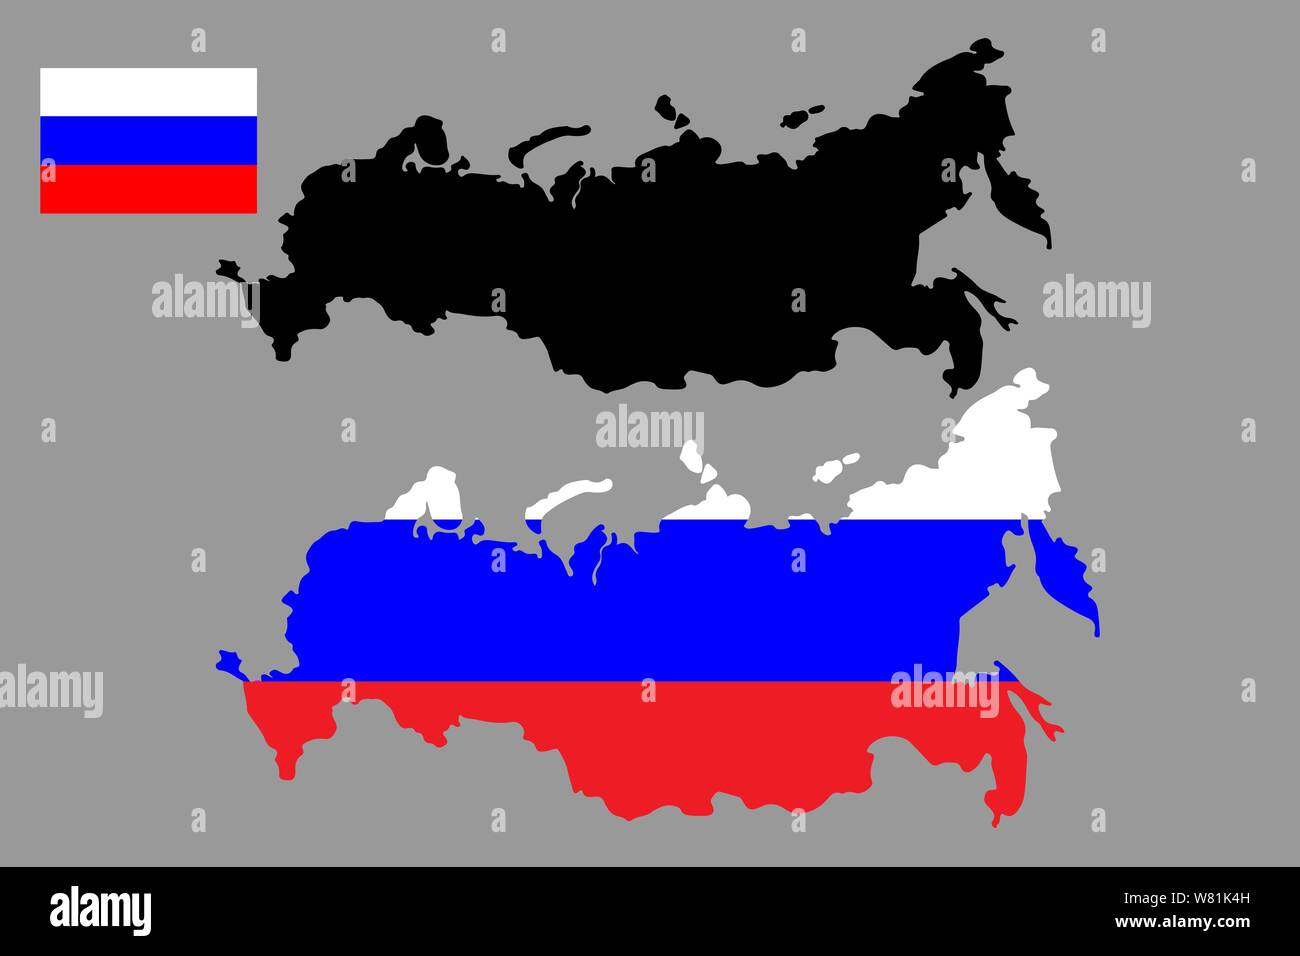 Map of the Russian Federation colored like the Russian flag Stock Vector